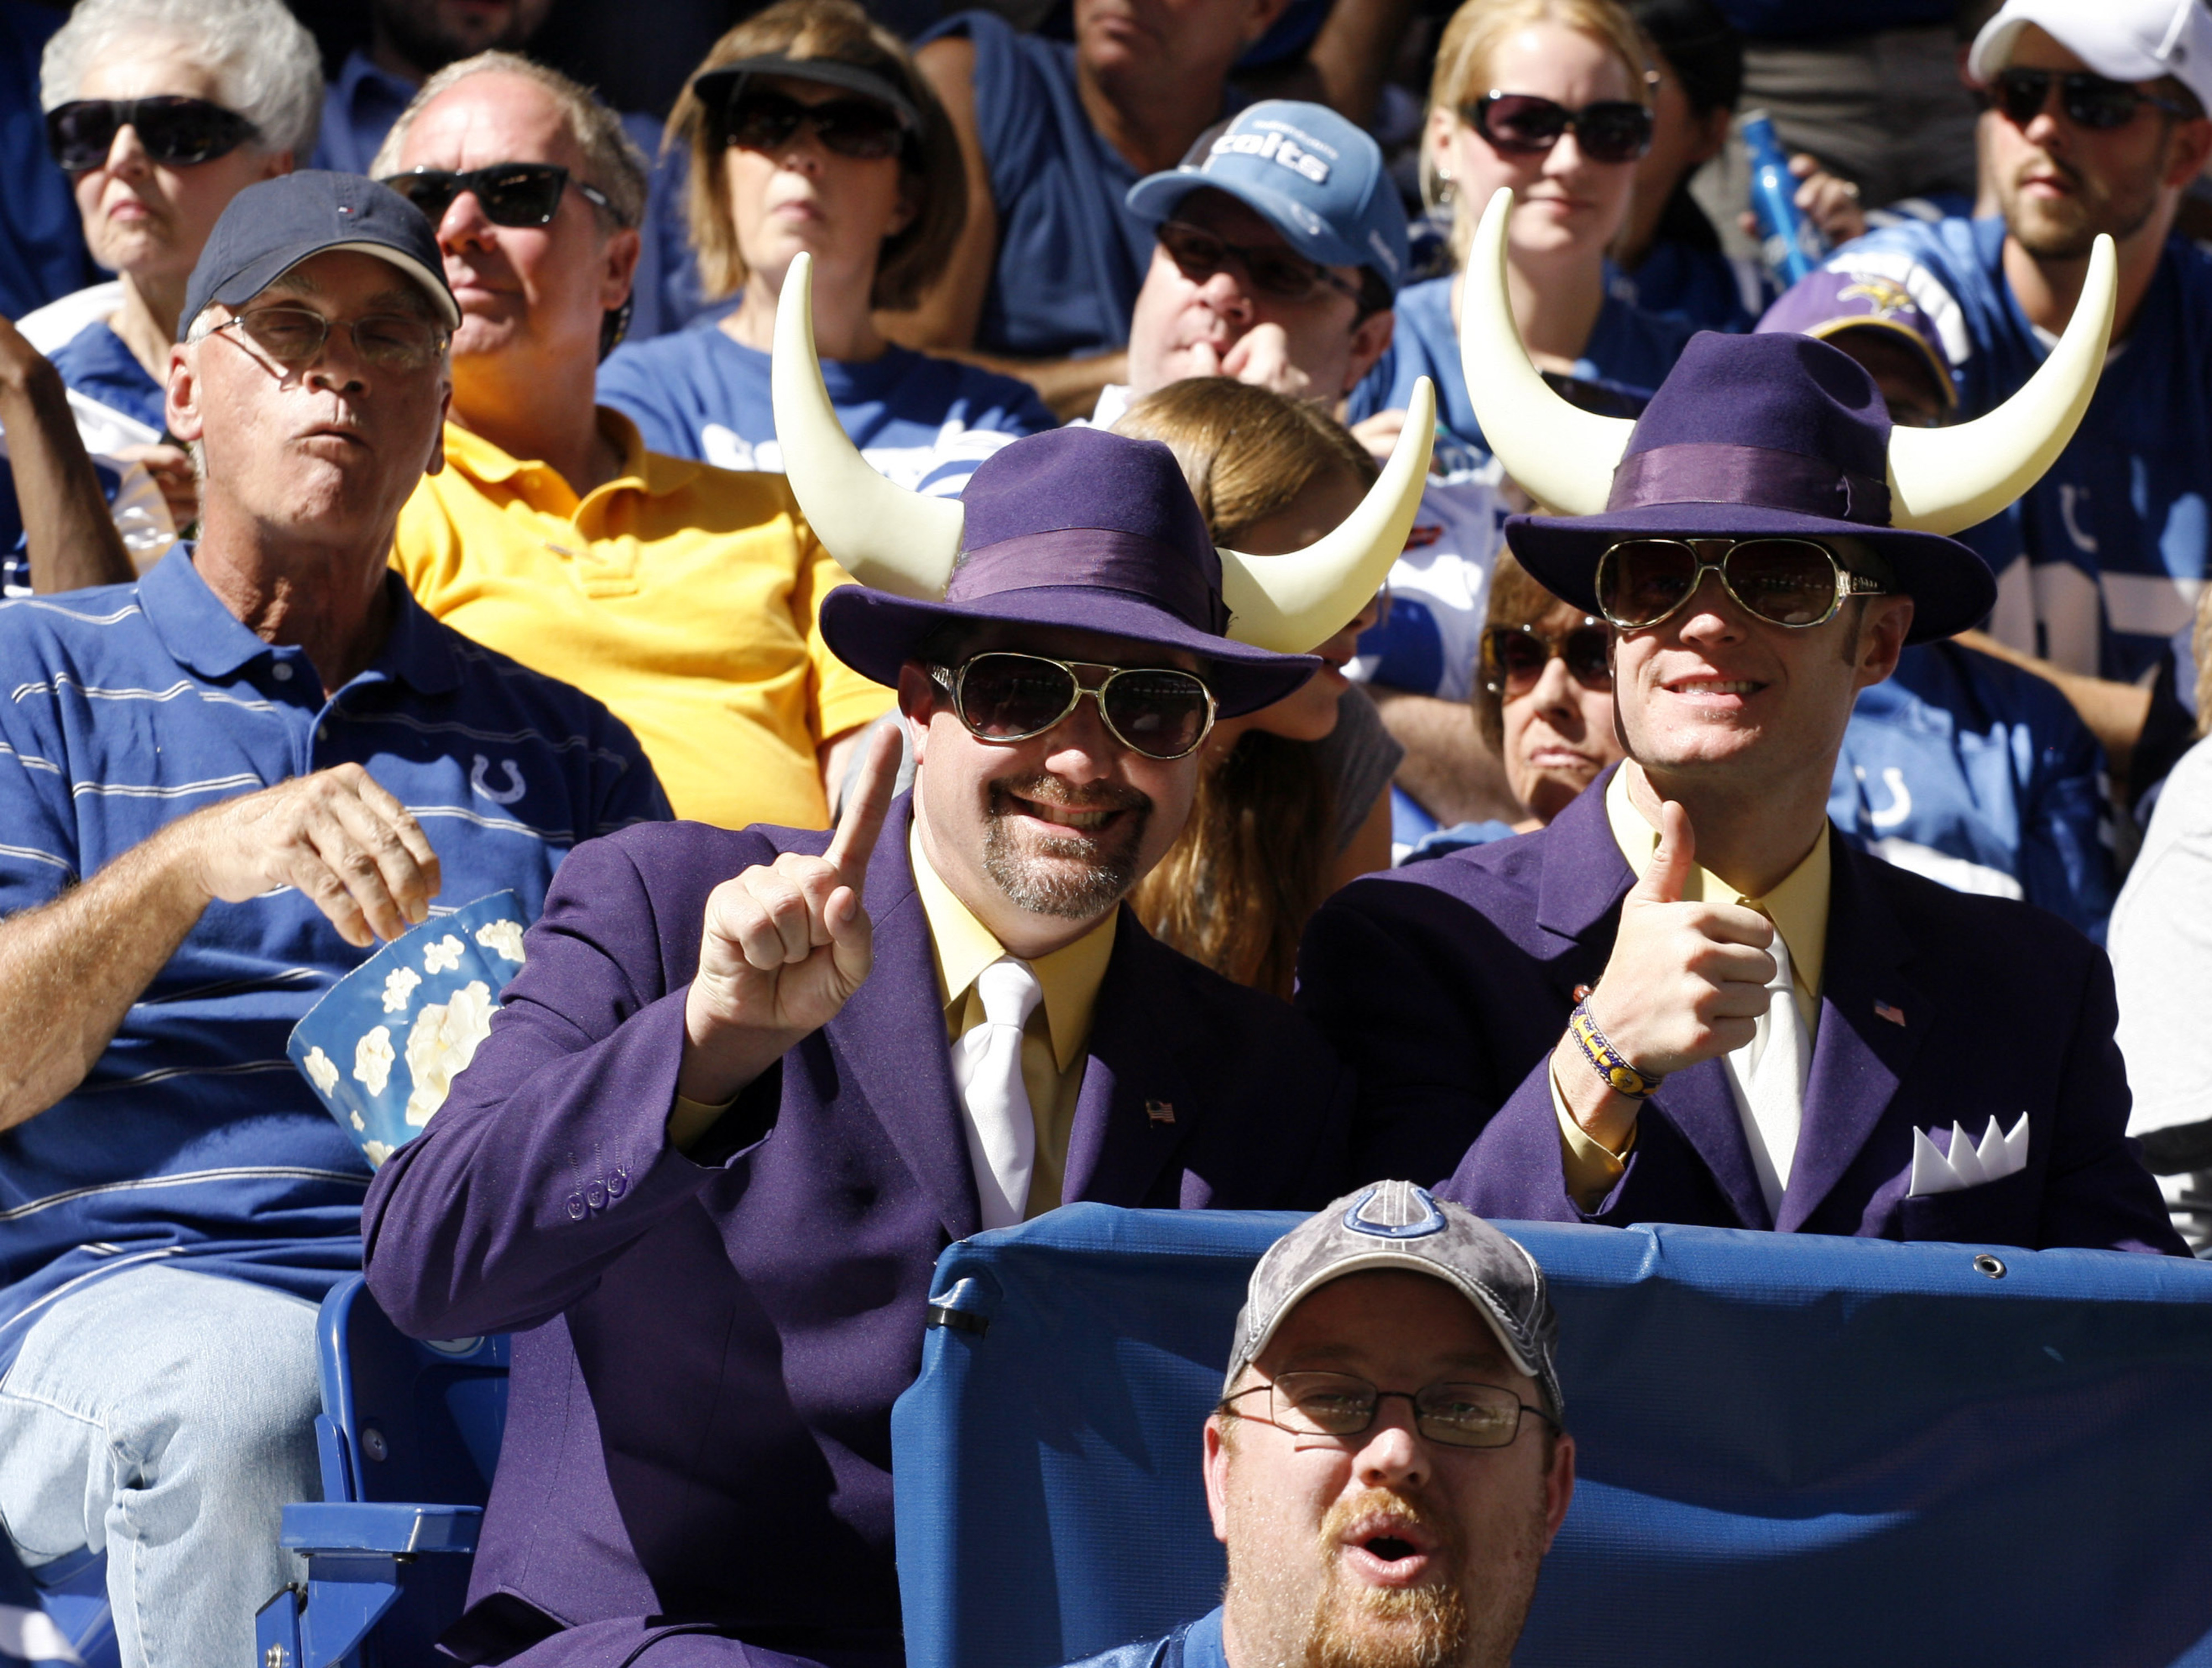 Sep 16, 2012; Indianapolis, IN, USA; Minnesota Vikings fans watch their team play against the Indianapolis Colts at Lucas Oil Stadium. Indianapolis defeats Minnesota 23-20. Mandatory Credit: Brian Spurlock-US PRESSWIRE